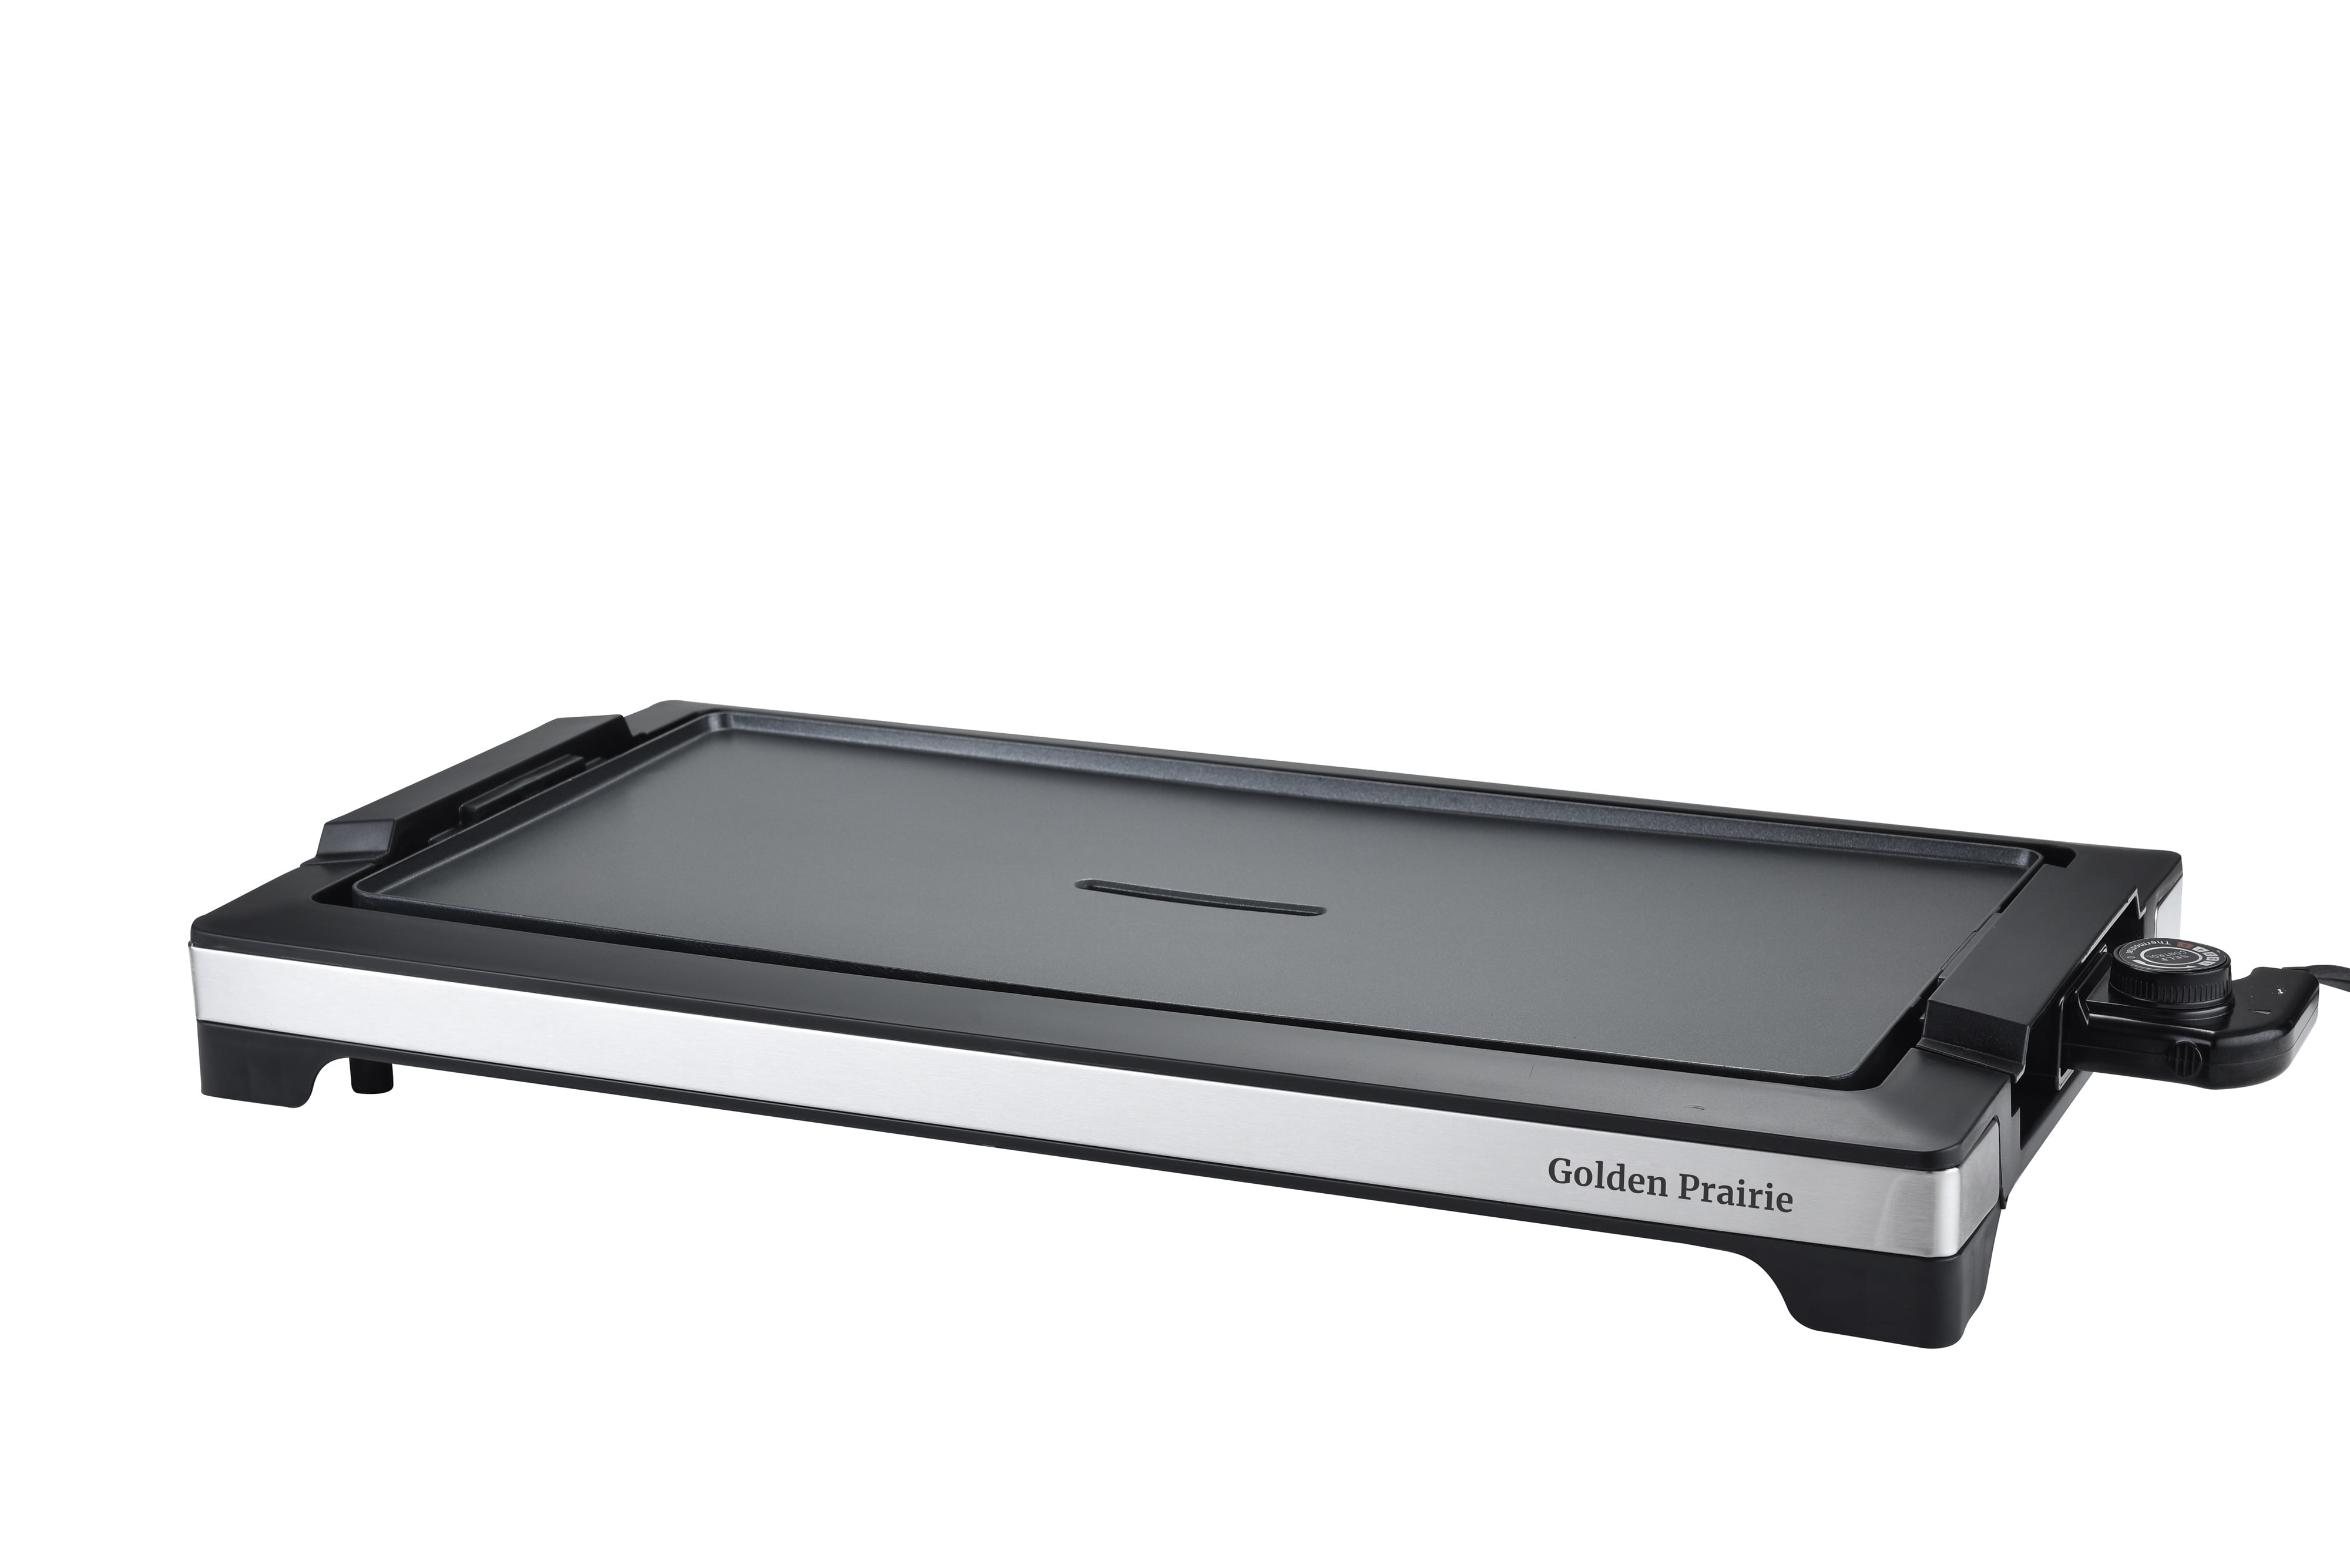 AEWHALE 2-in-1 Electric Griddle & Countertop Burner,2 Cooking Zone with  Adjustable Temperature,1800W Electric Hot Plate with Removable Griddle Pan